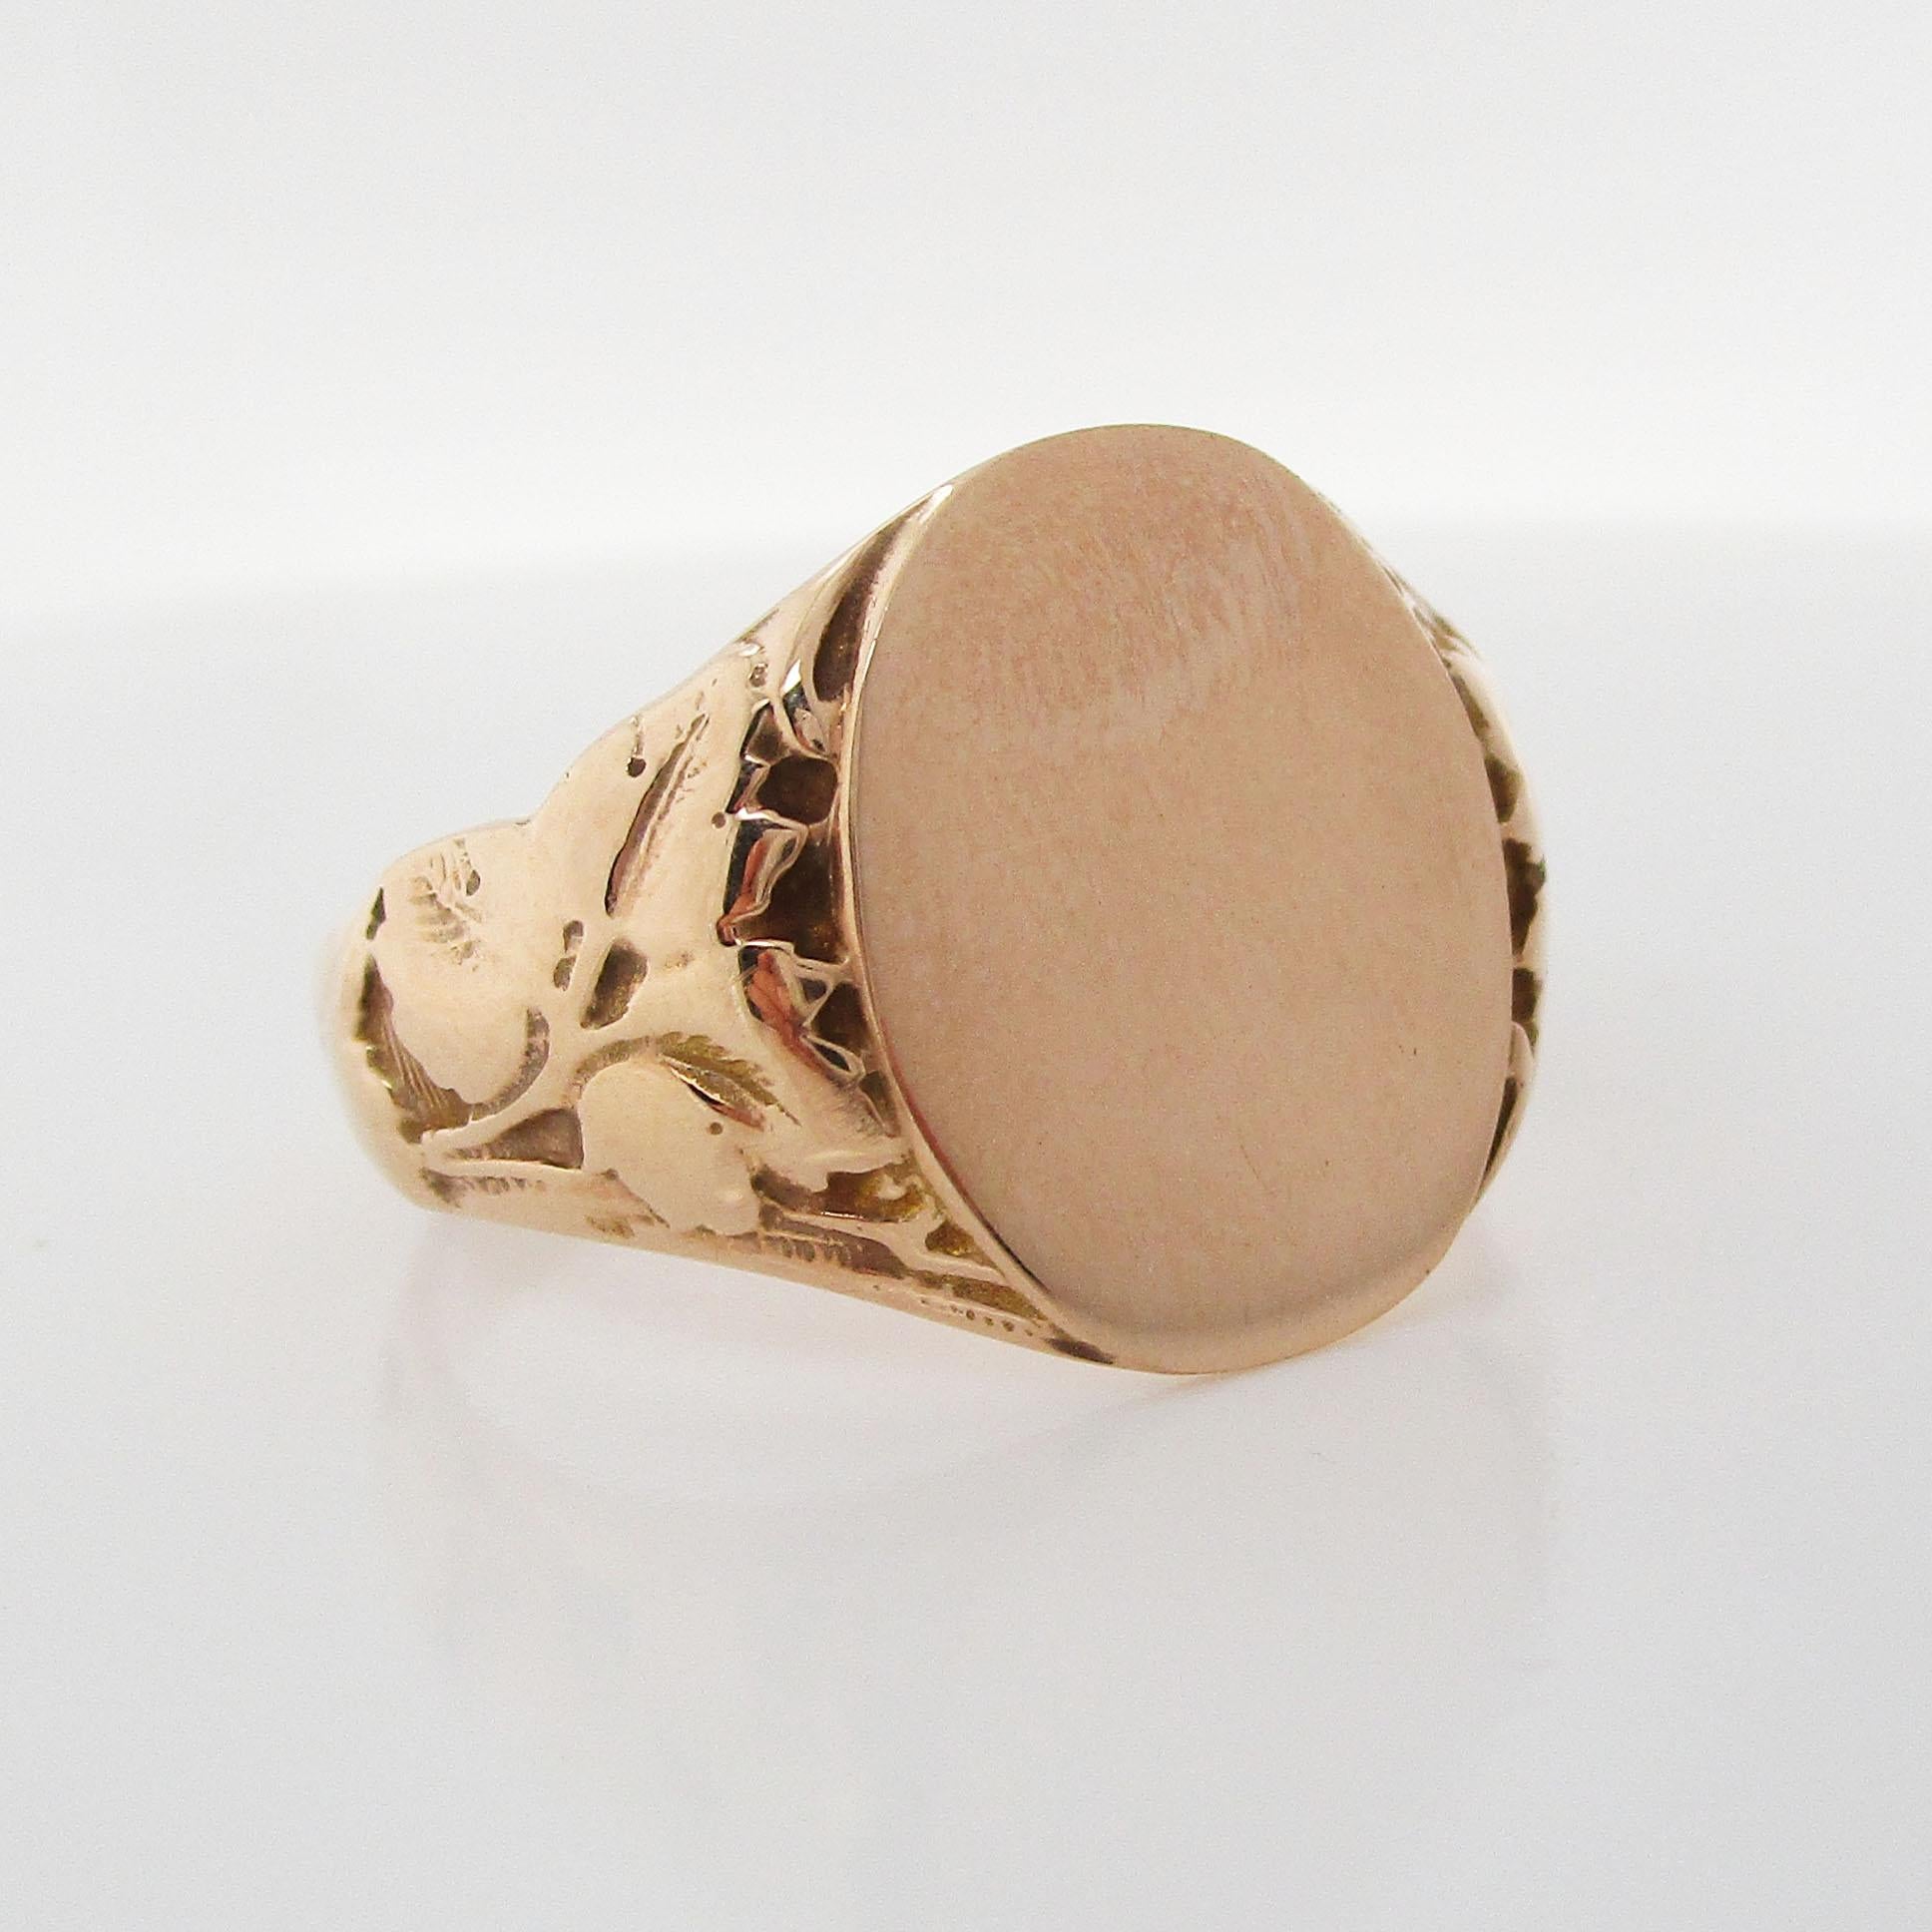 This is a magnificent Victorian signet ring in 10k rose gold with elegant engraved details. The engraved shoulders have a distinguished leaf motif that adds to the overall elegance of this beautiful piece. The ring has an excellent weight and feel